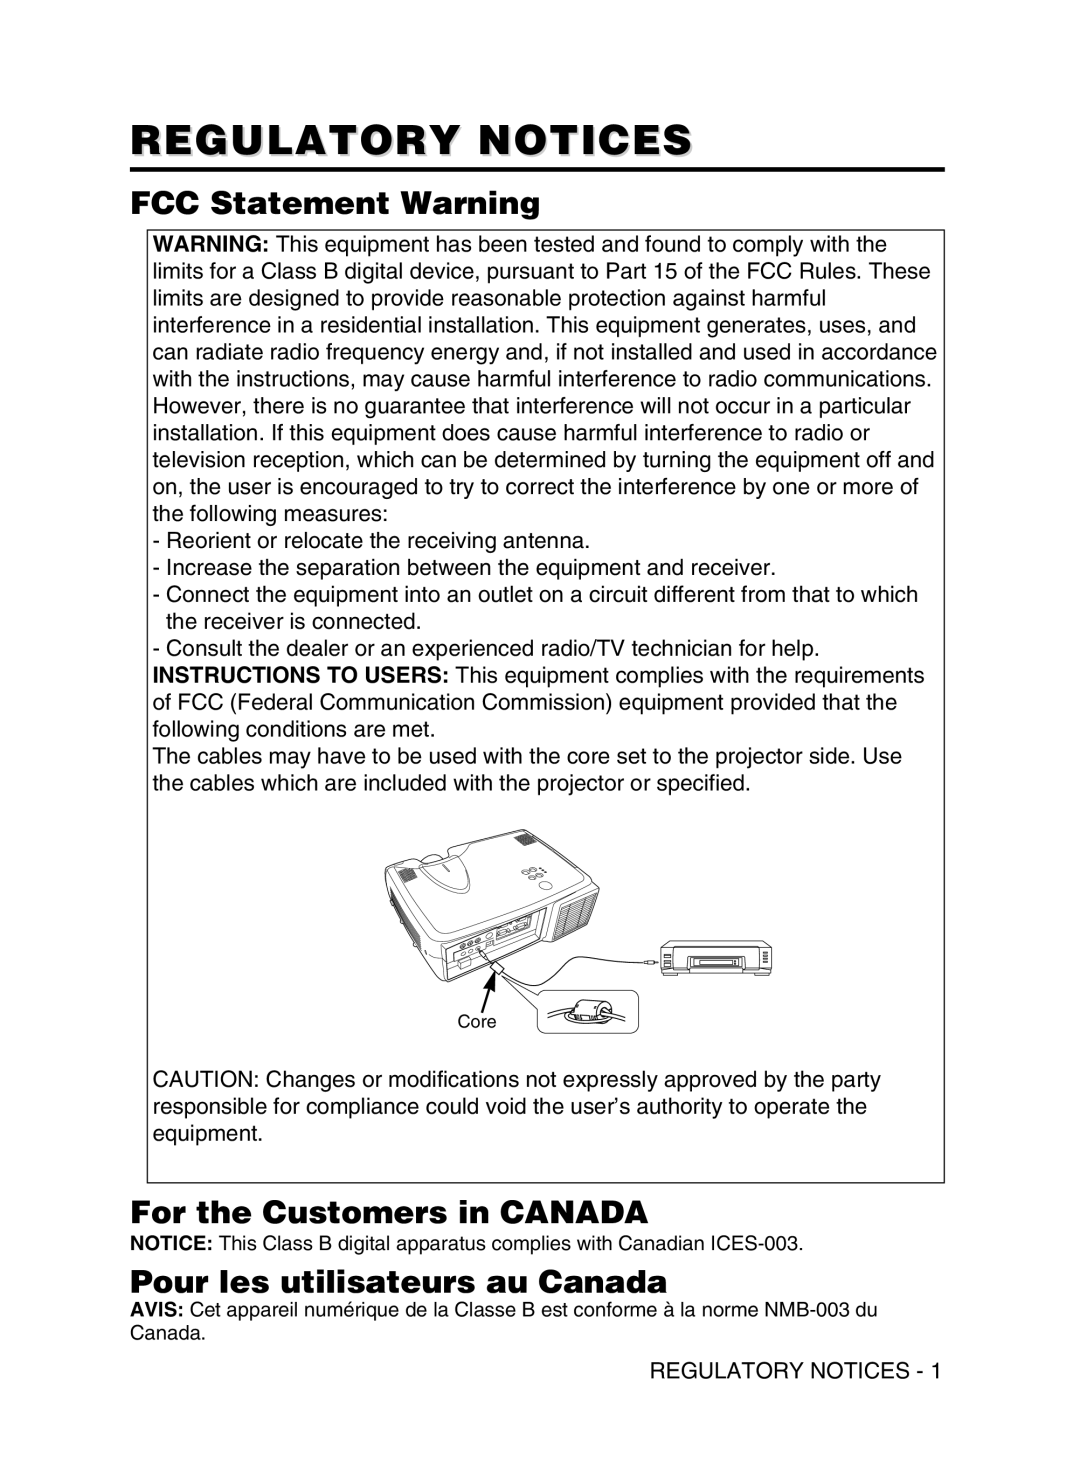 Dukane 8053 Regulatory Notices, FCC Statement Warning, For the Customers in CANADA, Pour les utilisateurs au Canada 